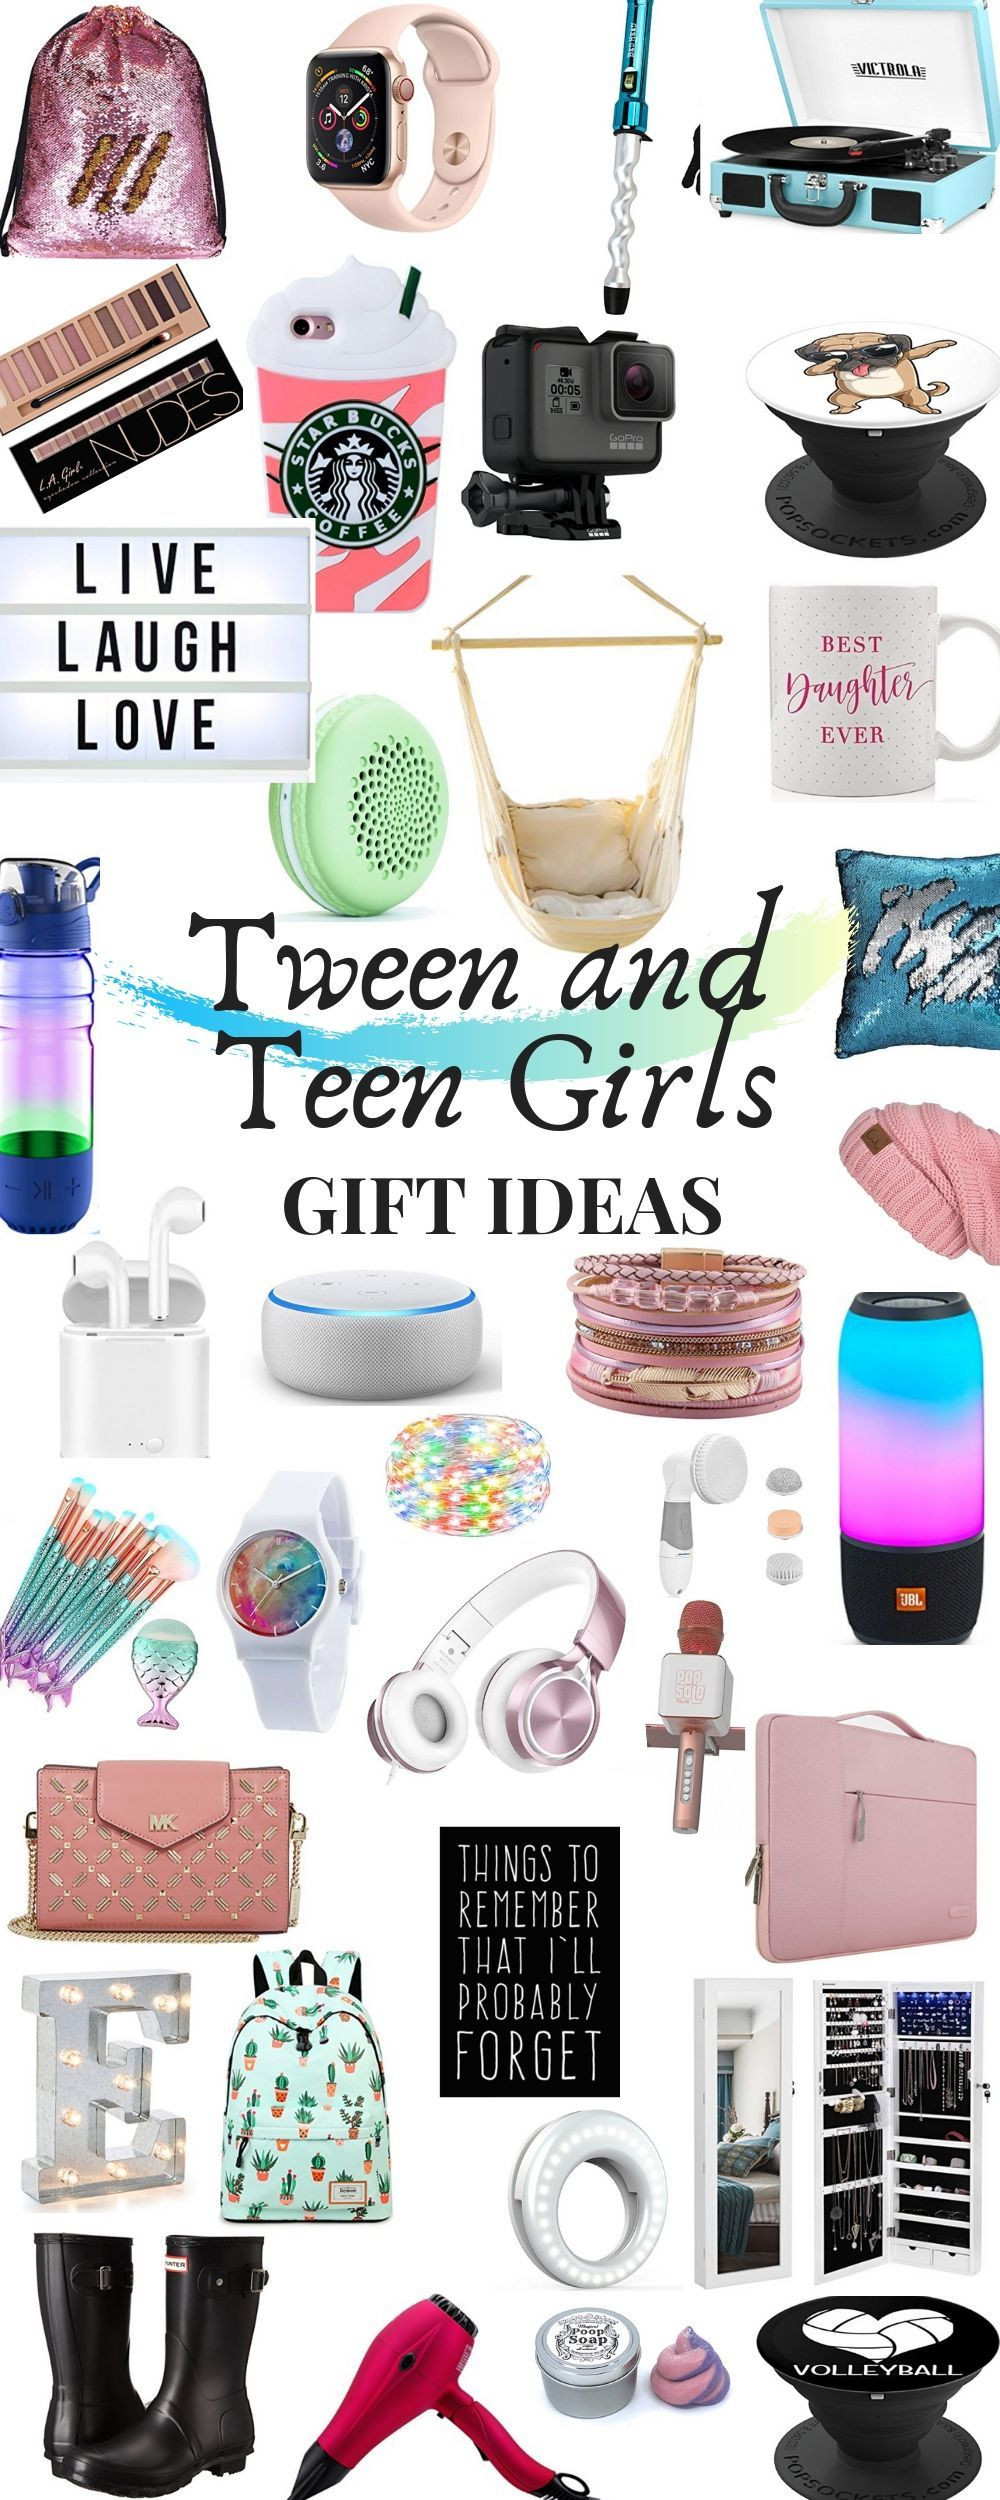 Amazing Gift Ideas For Girlfriend
 Pin on Gift Ideas for Teenagers